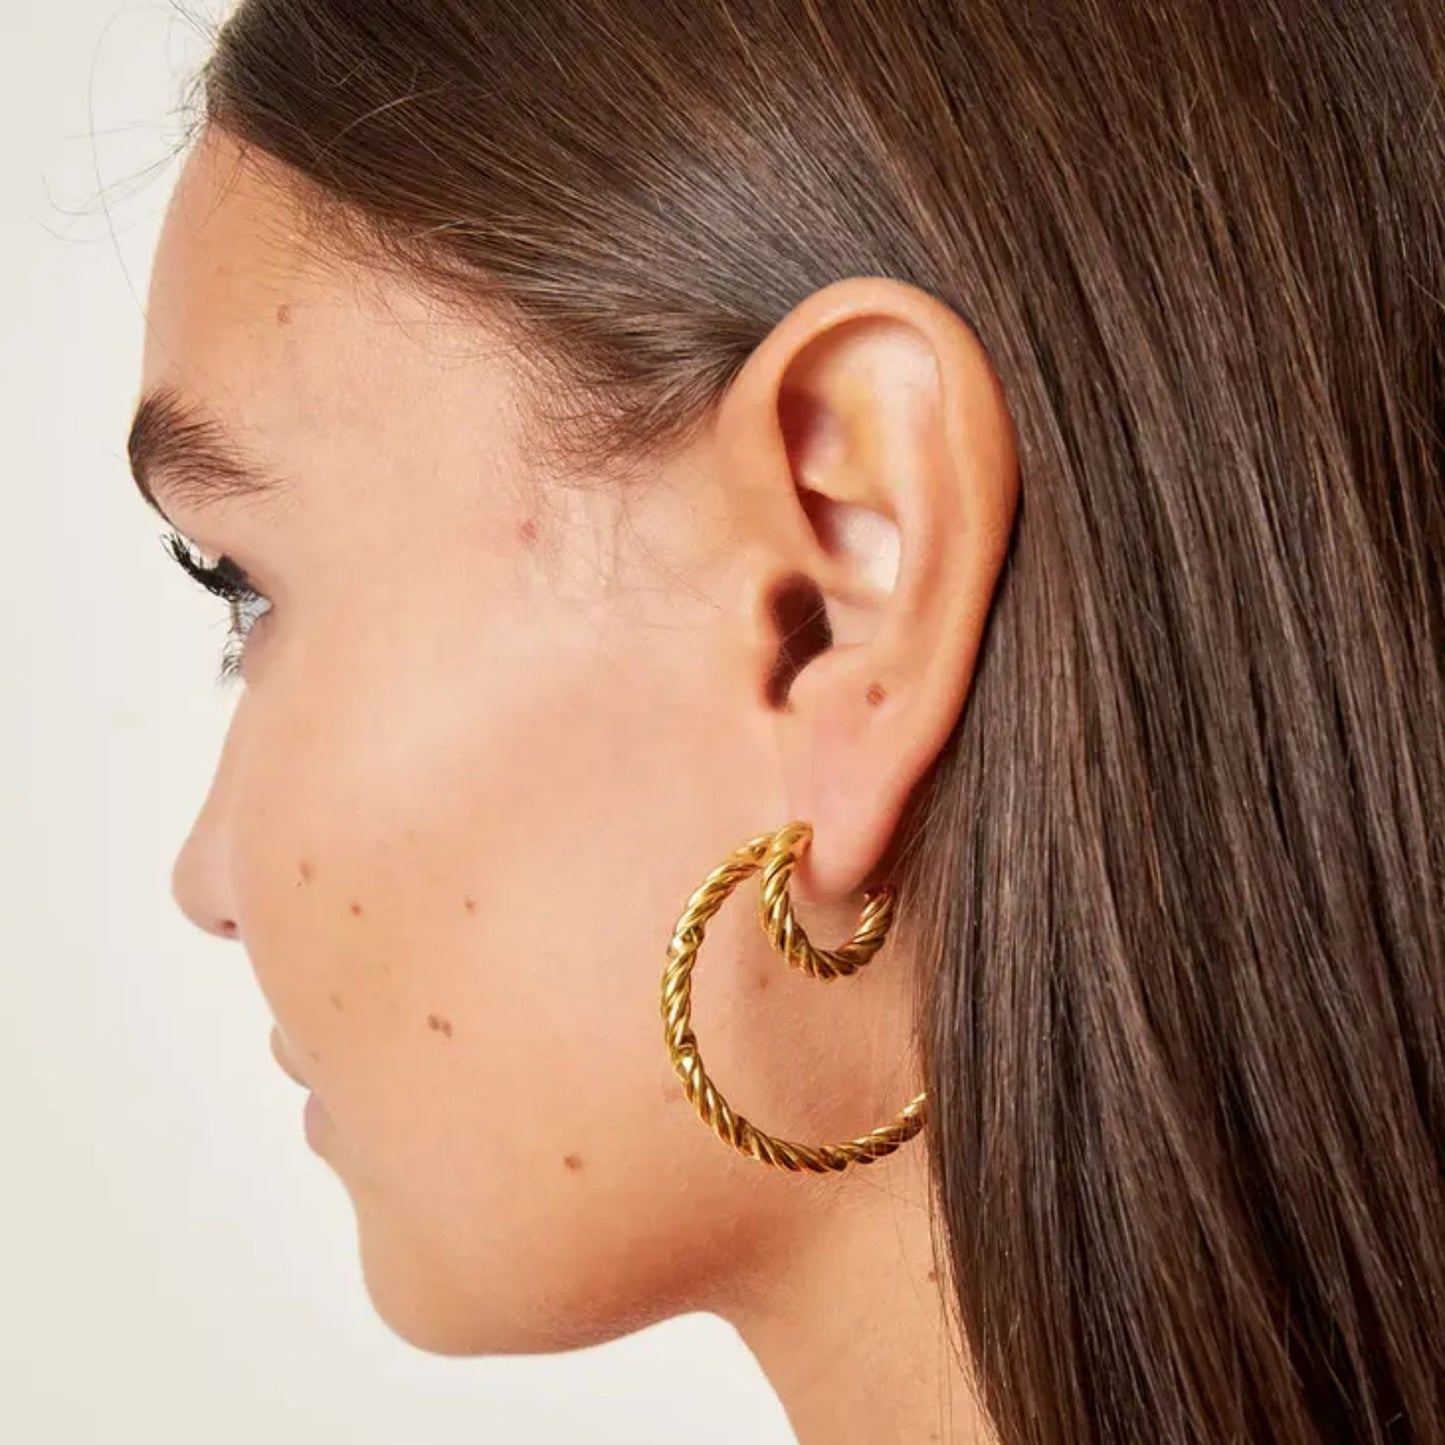 Gold Twisted Hoop Earrings (two sizes)